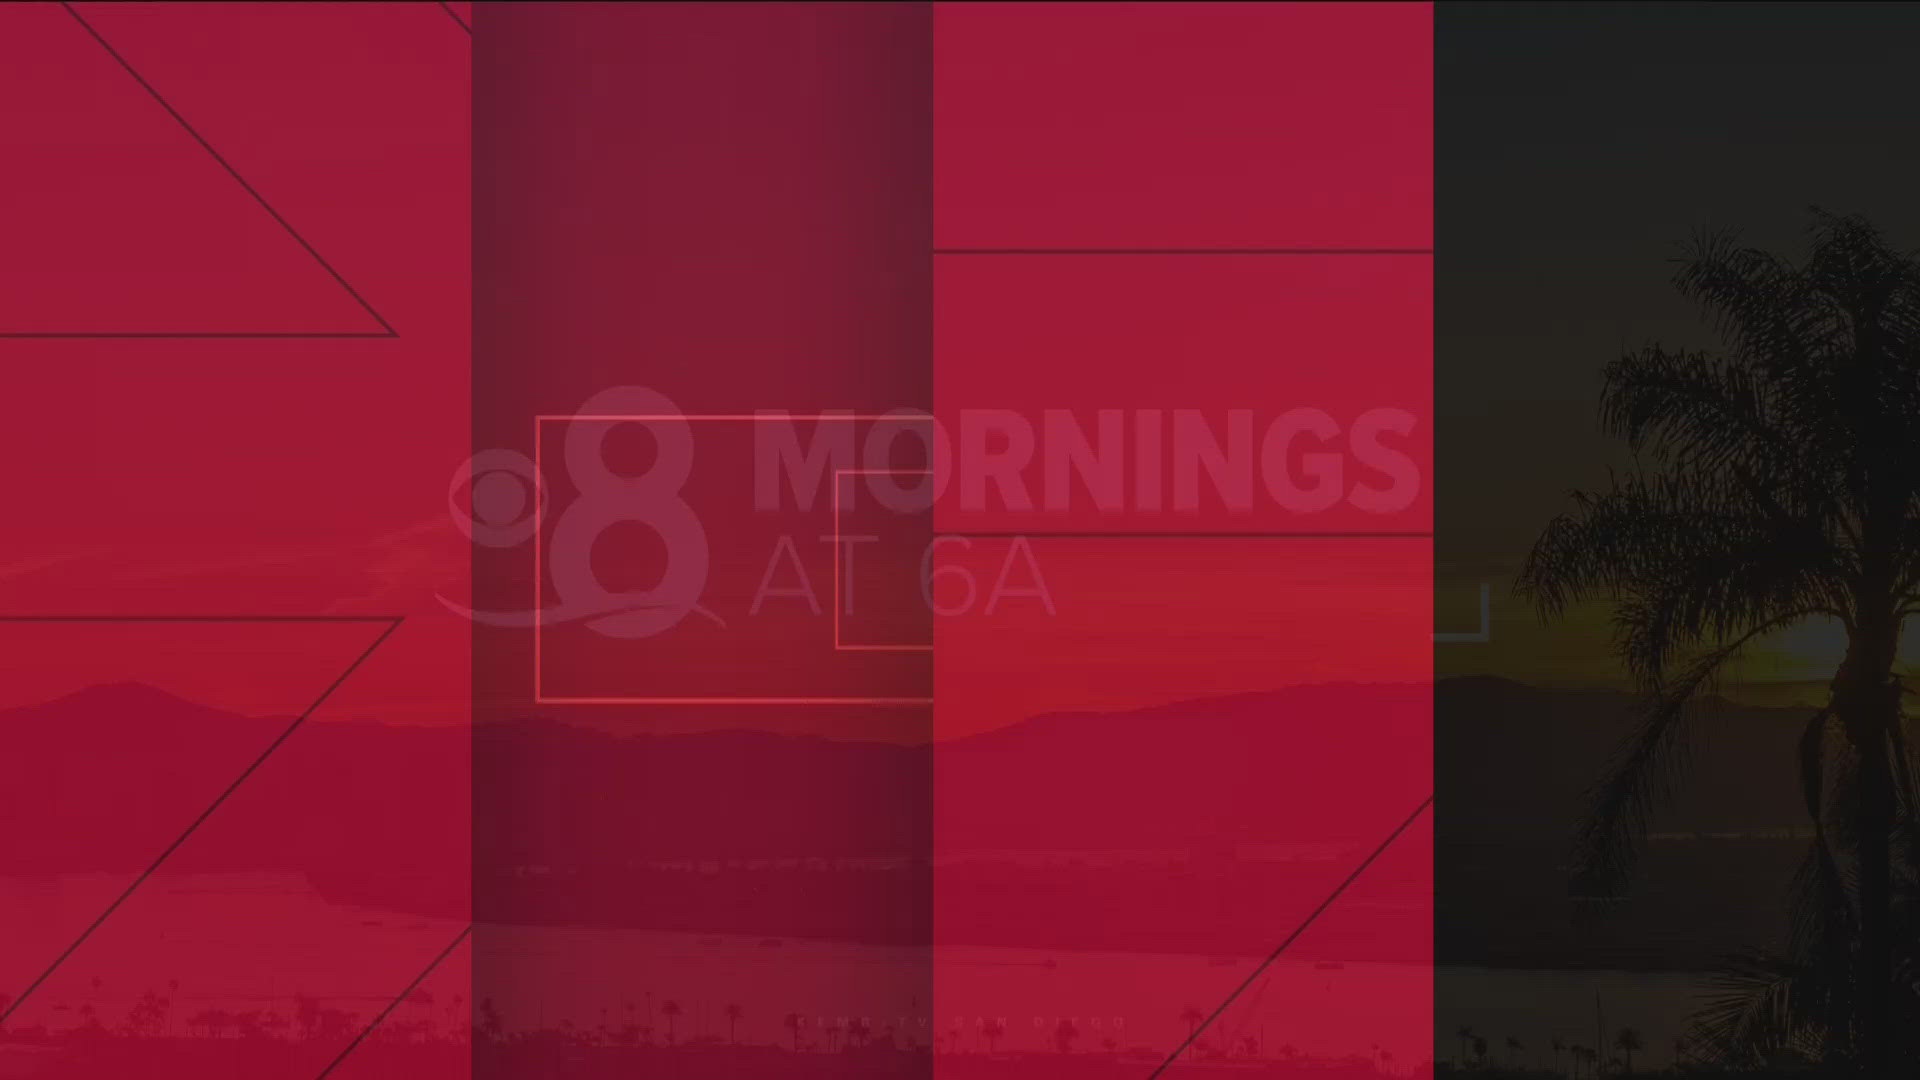 Here are the top stories around San Diego County for the morning of Tuesday, May 7.
For the latest news, weather and sports, head to:
https://www.cbs8.com/